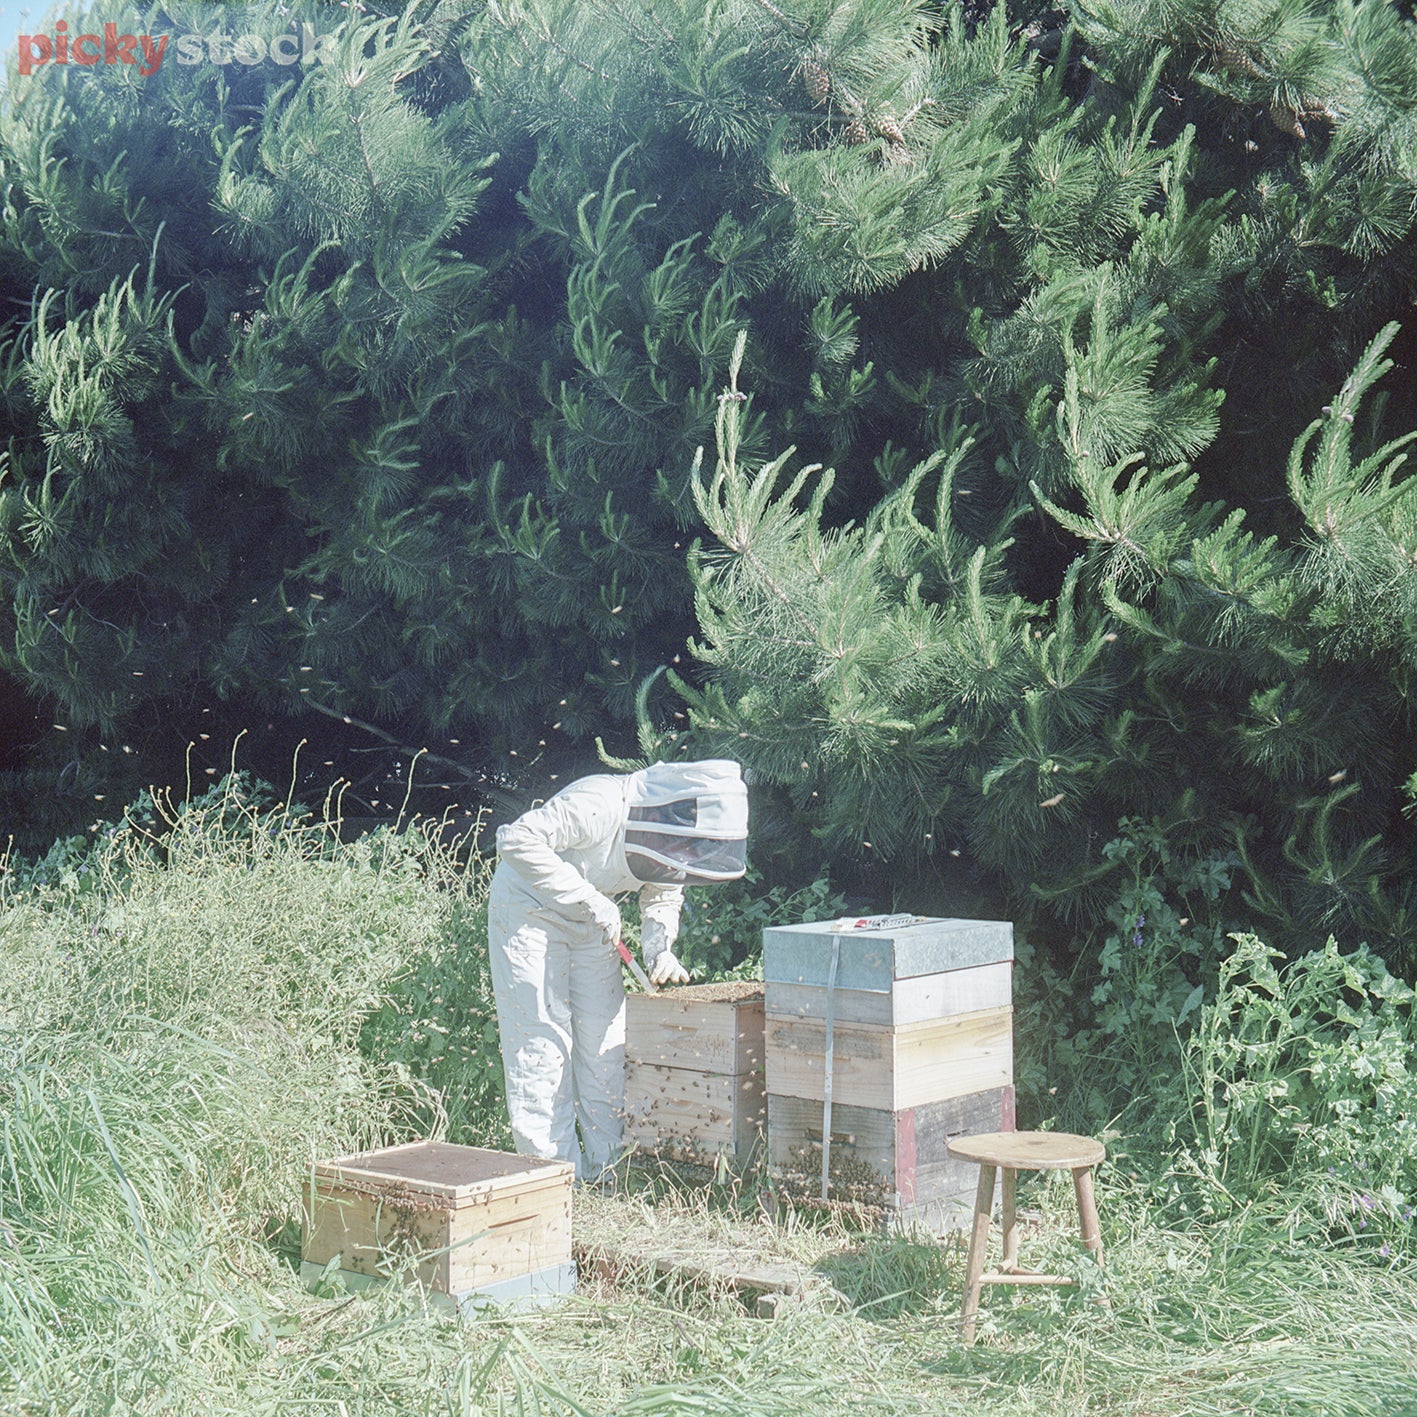 Mid-close up shot of beekeeper inspecting live beehive in the long grass. Deep green pine trees in background. Bees flying around the frame. Soft blue sky. 